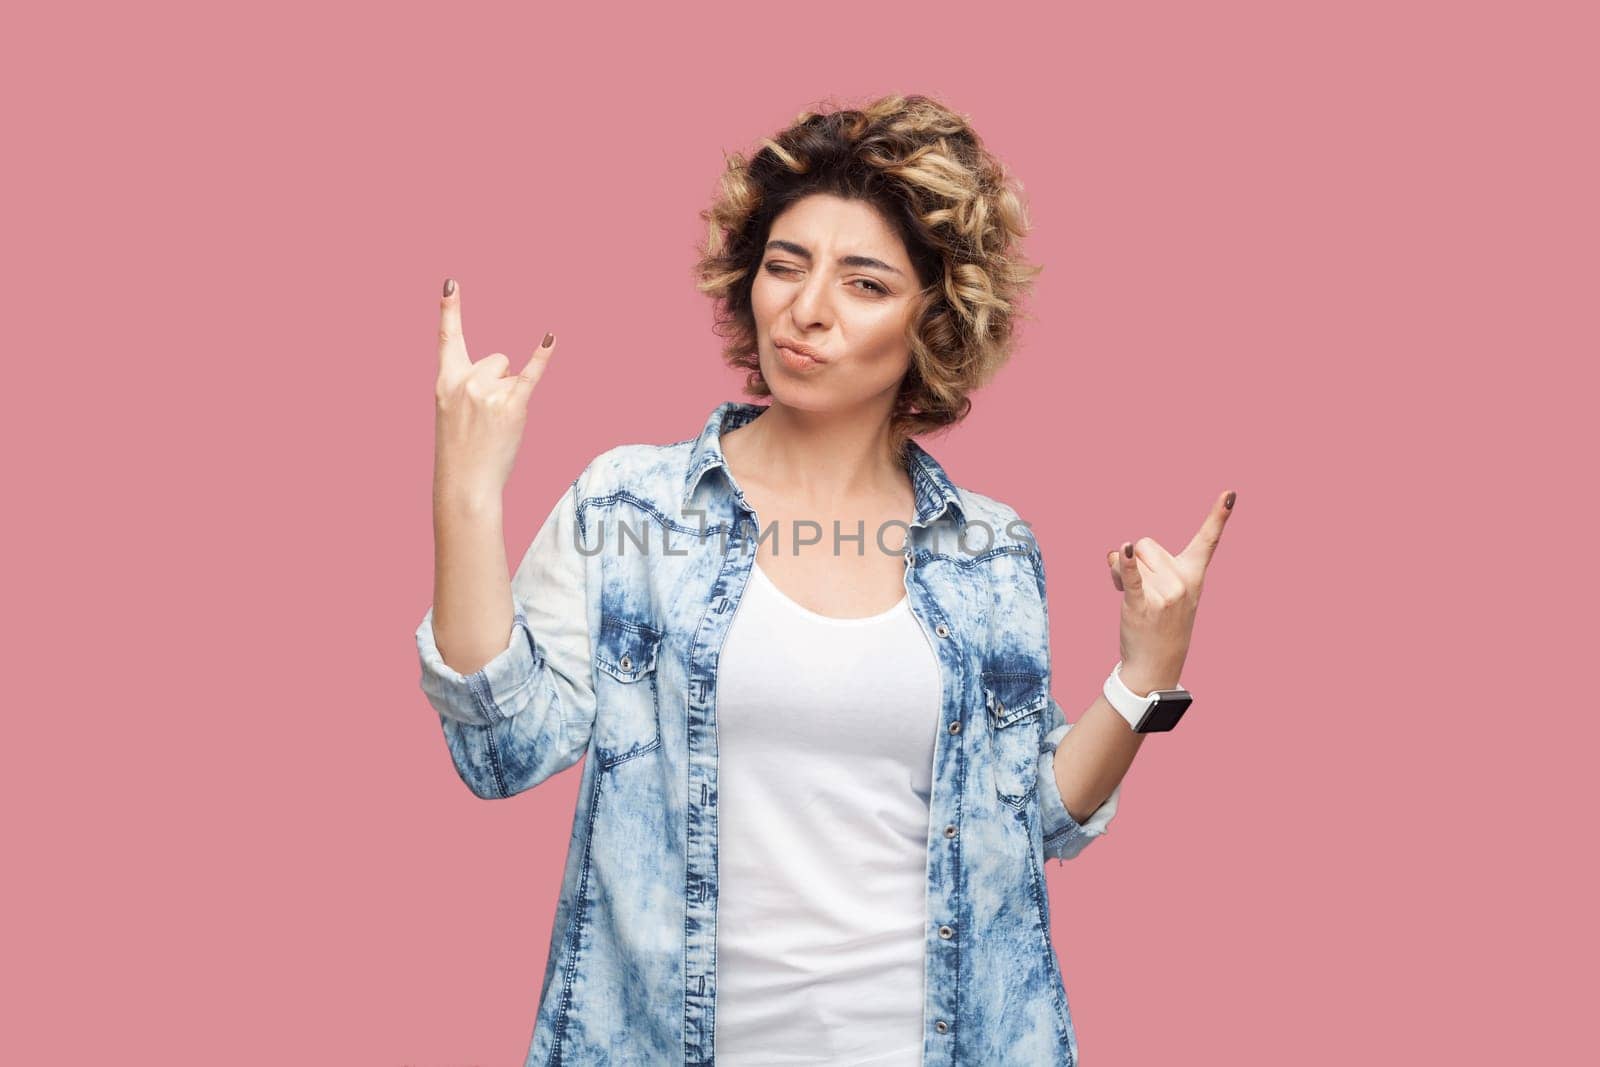 Portrait of cool festive woman with curly hairstyle wearing blue shirt standing and showing rock and roll gesture, enjoying concert. Indoor studio shot isolated on pink background.